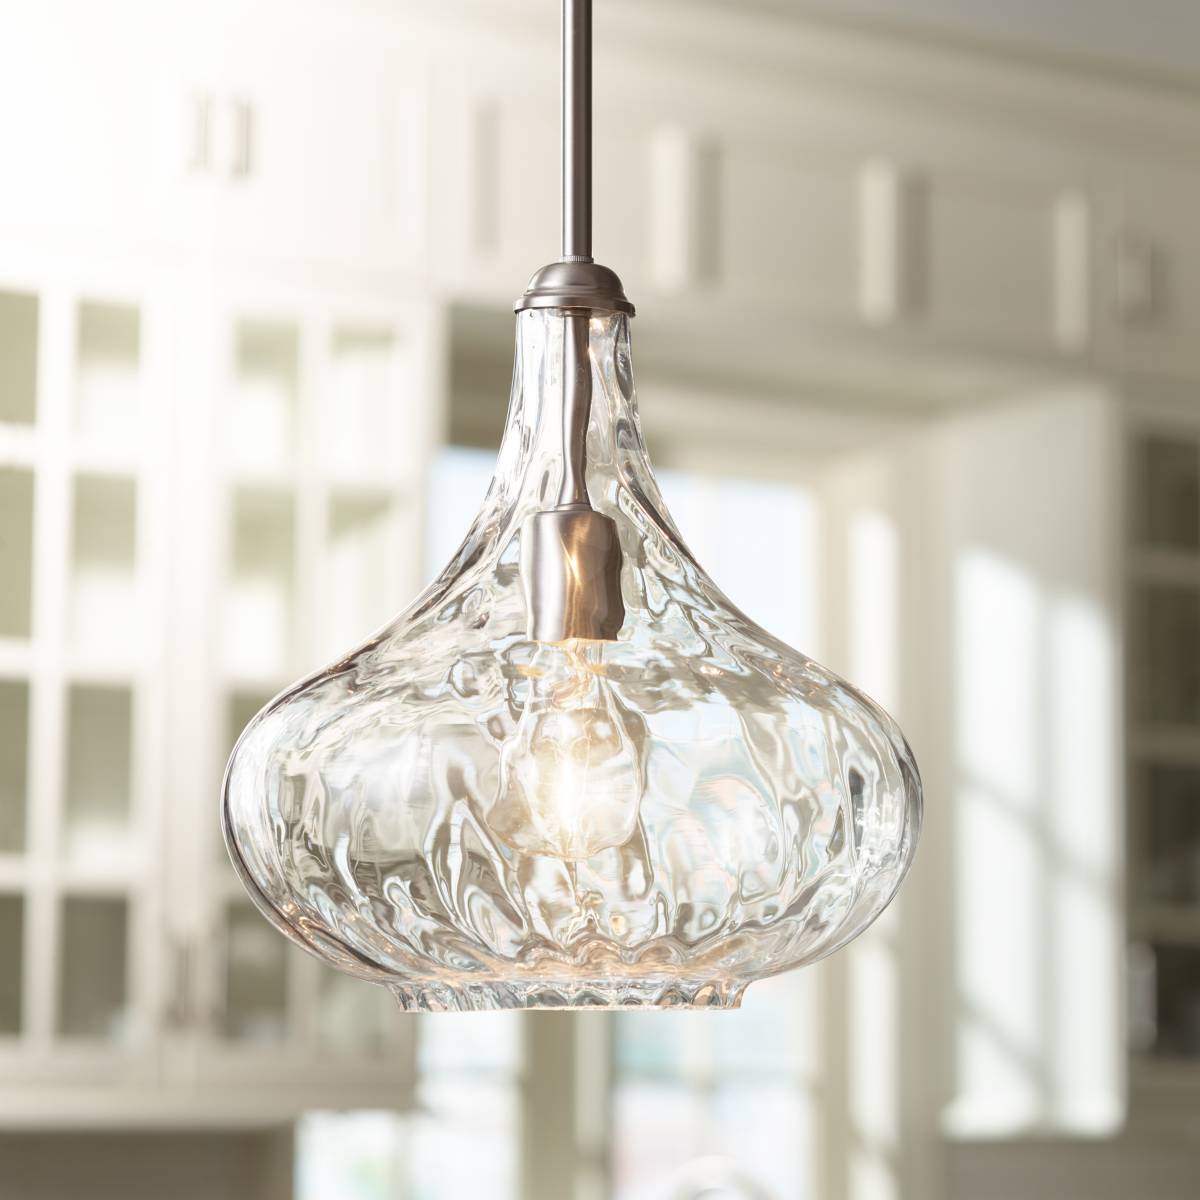 360 Lighting Cora 11 Wide Modern Nickel And Textured Glass Pendant  2y960cropped ?qlt=70&wid=1200&hei=1200&fmt=jpeg